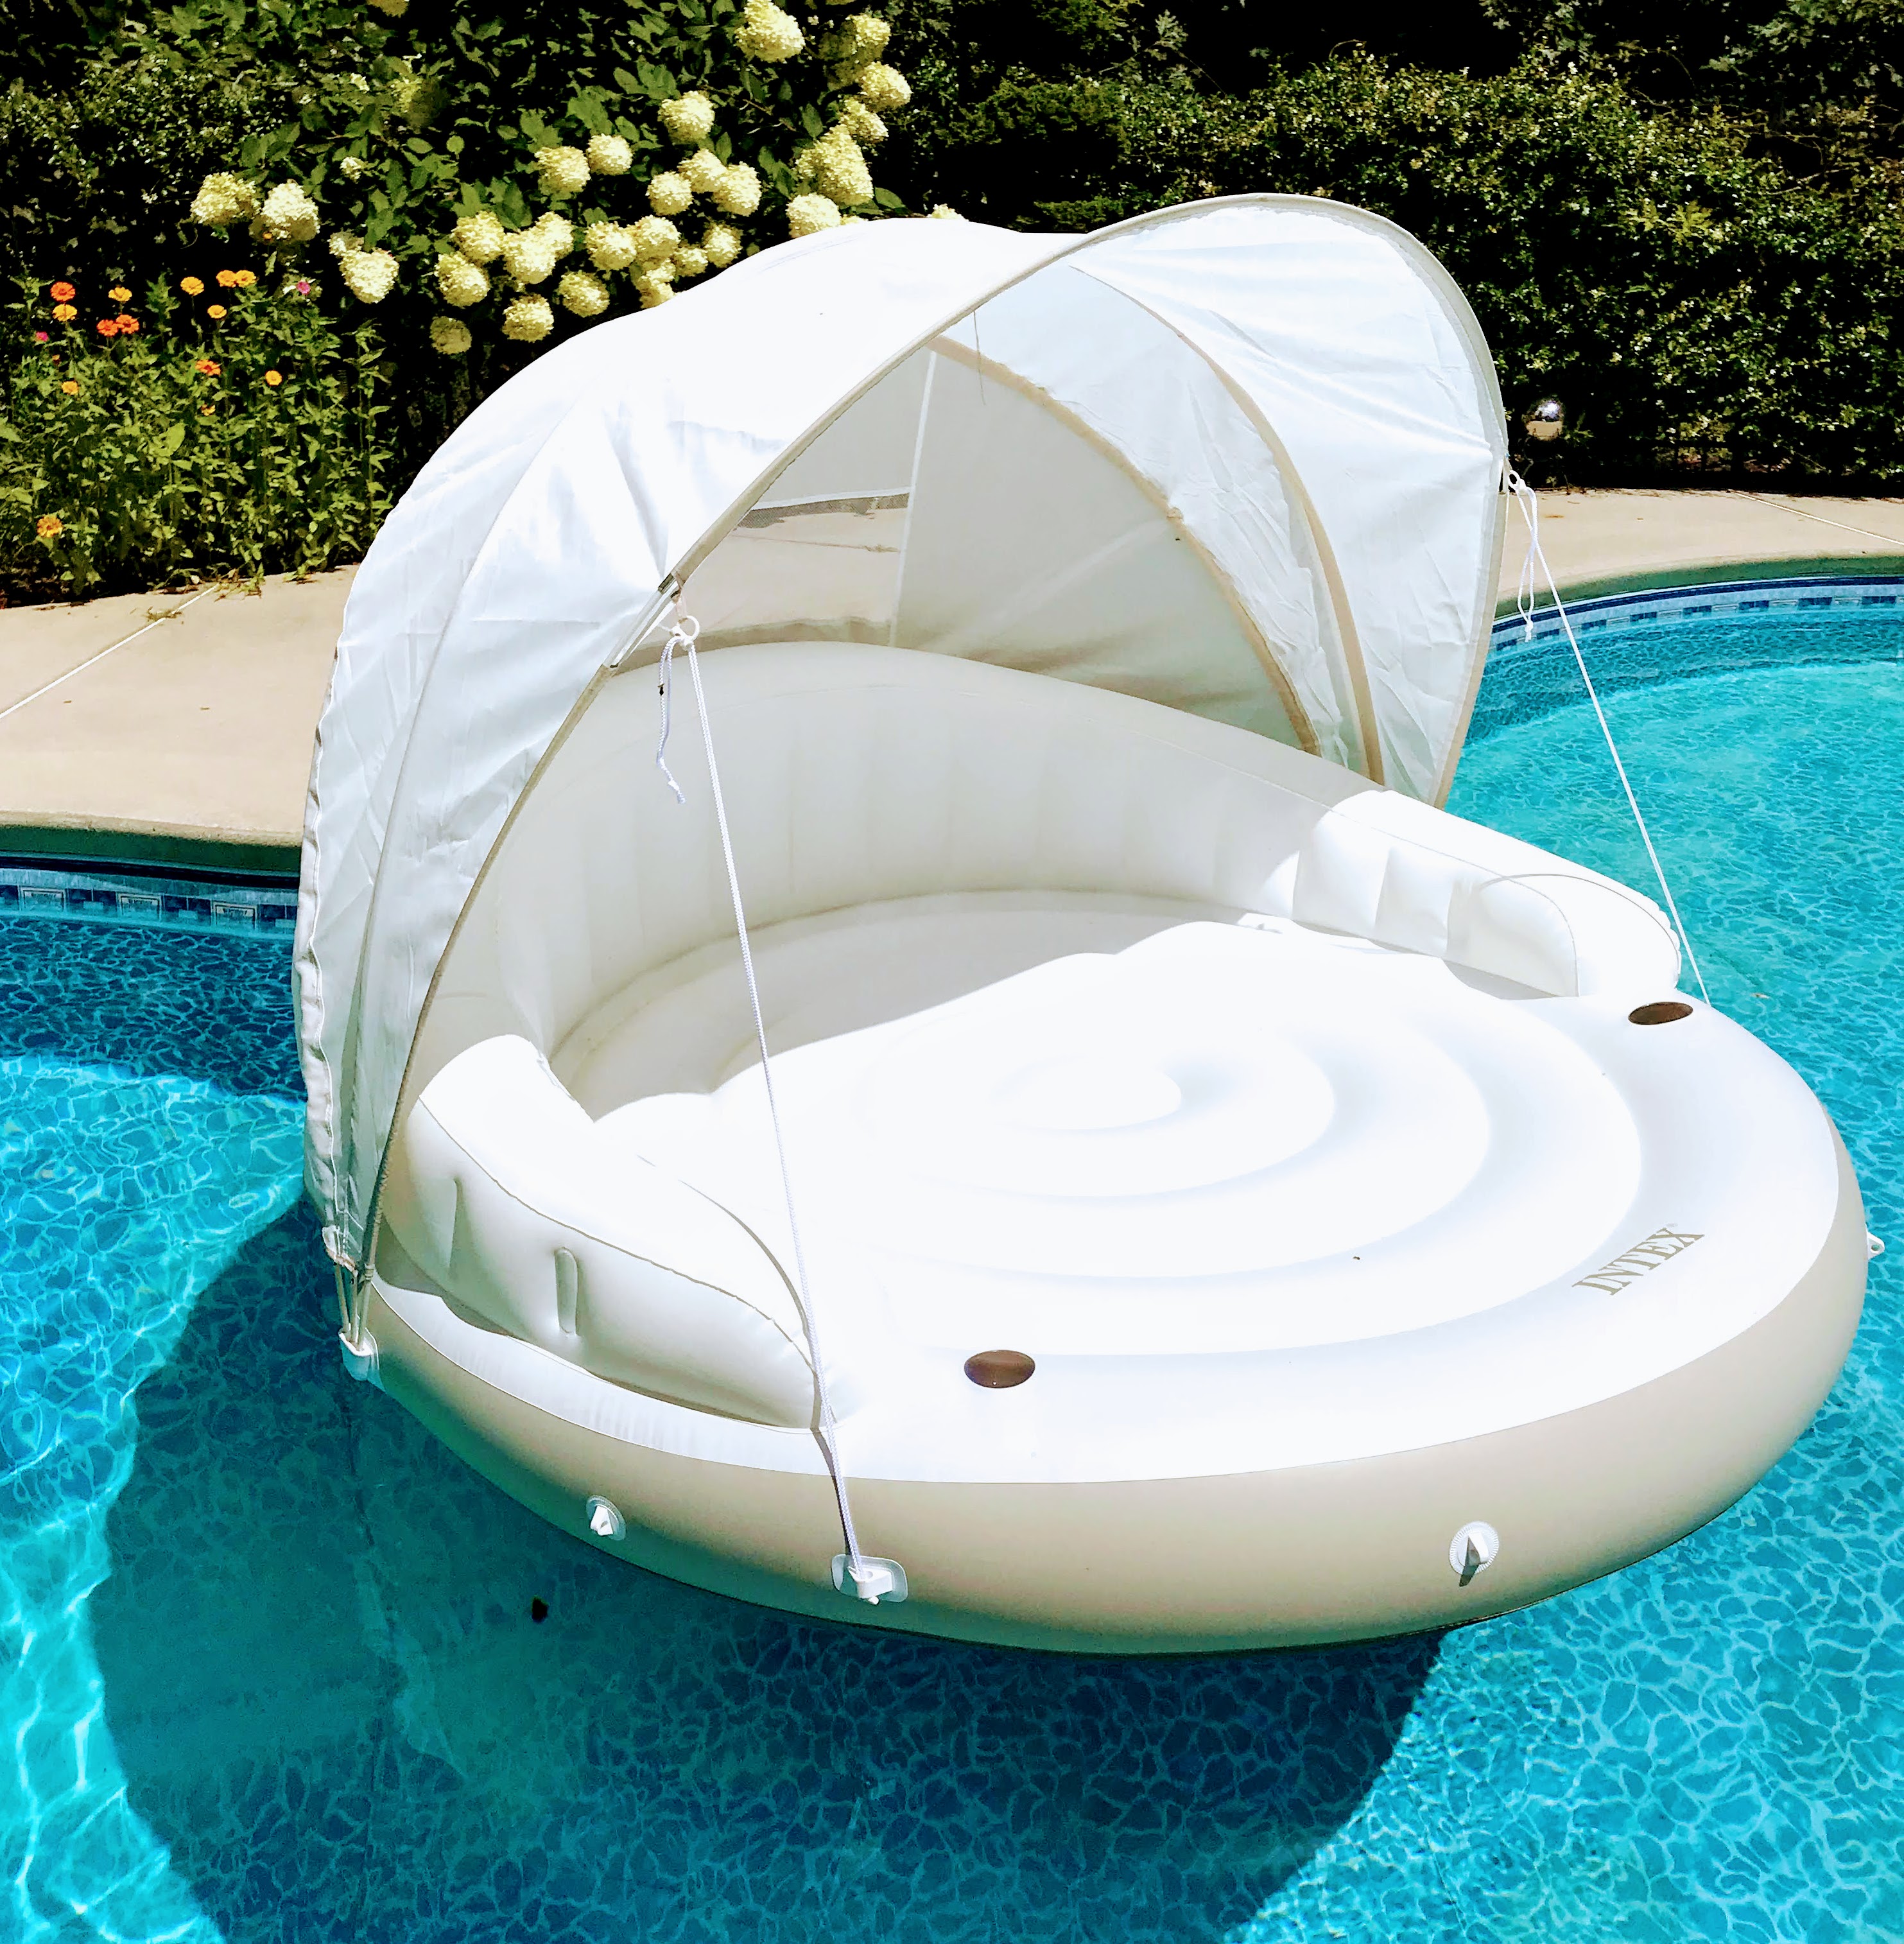 Inflatable Float - Winners of Our Pool Float Contest